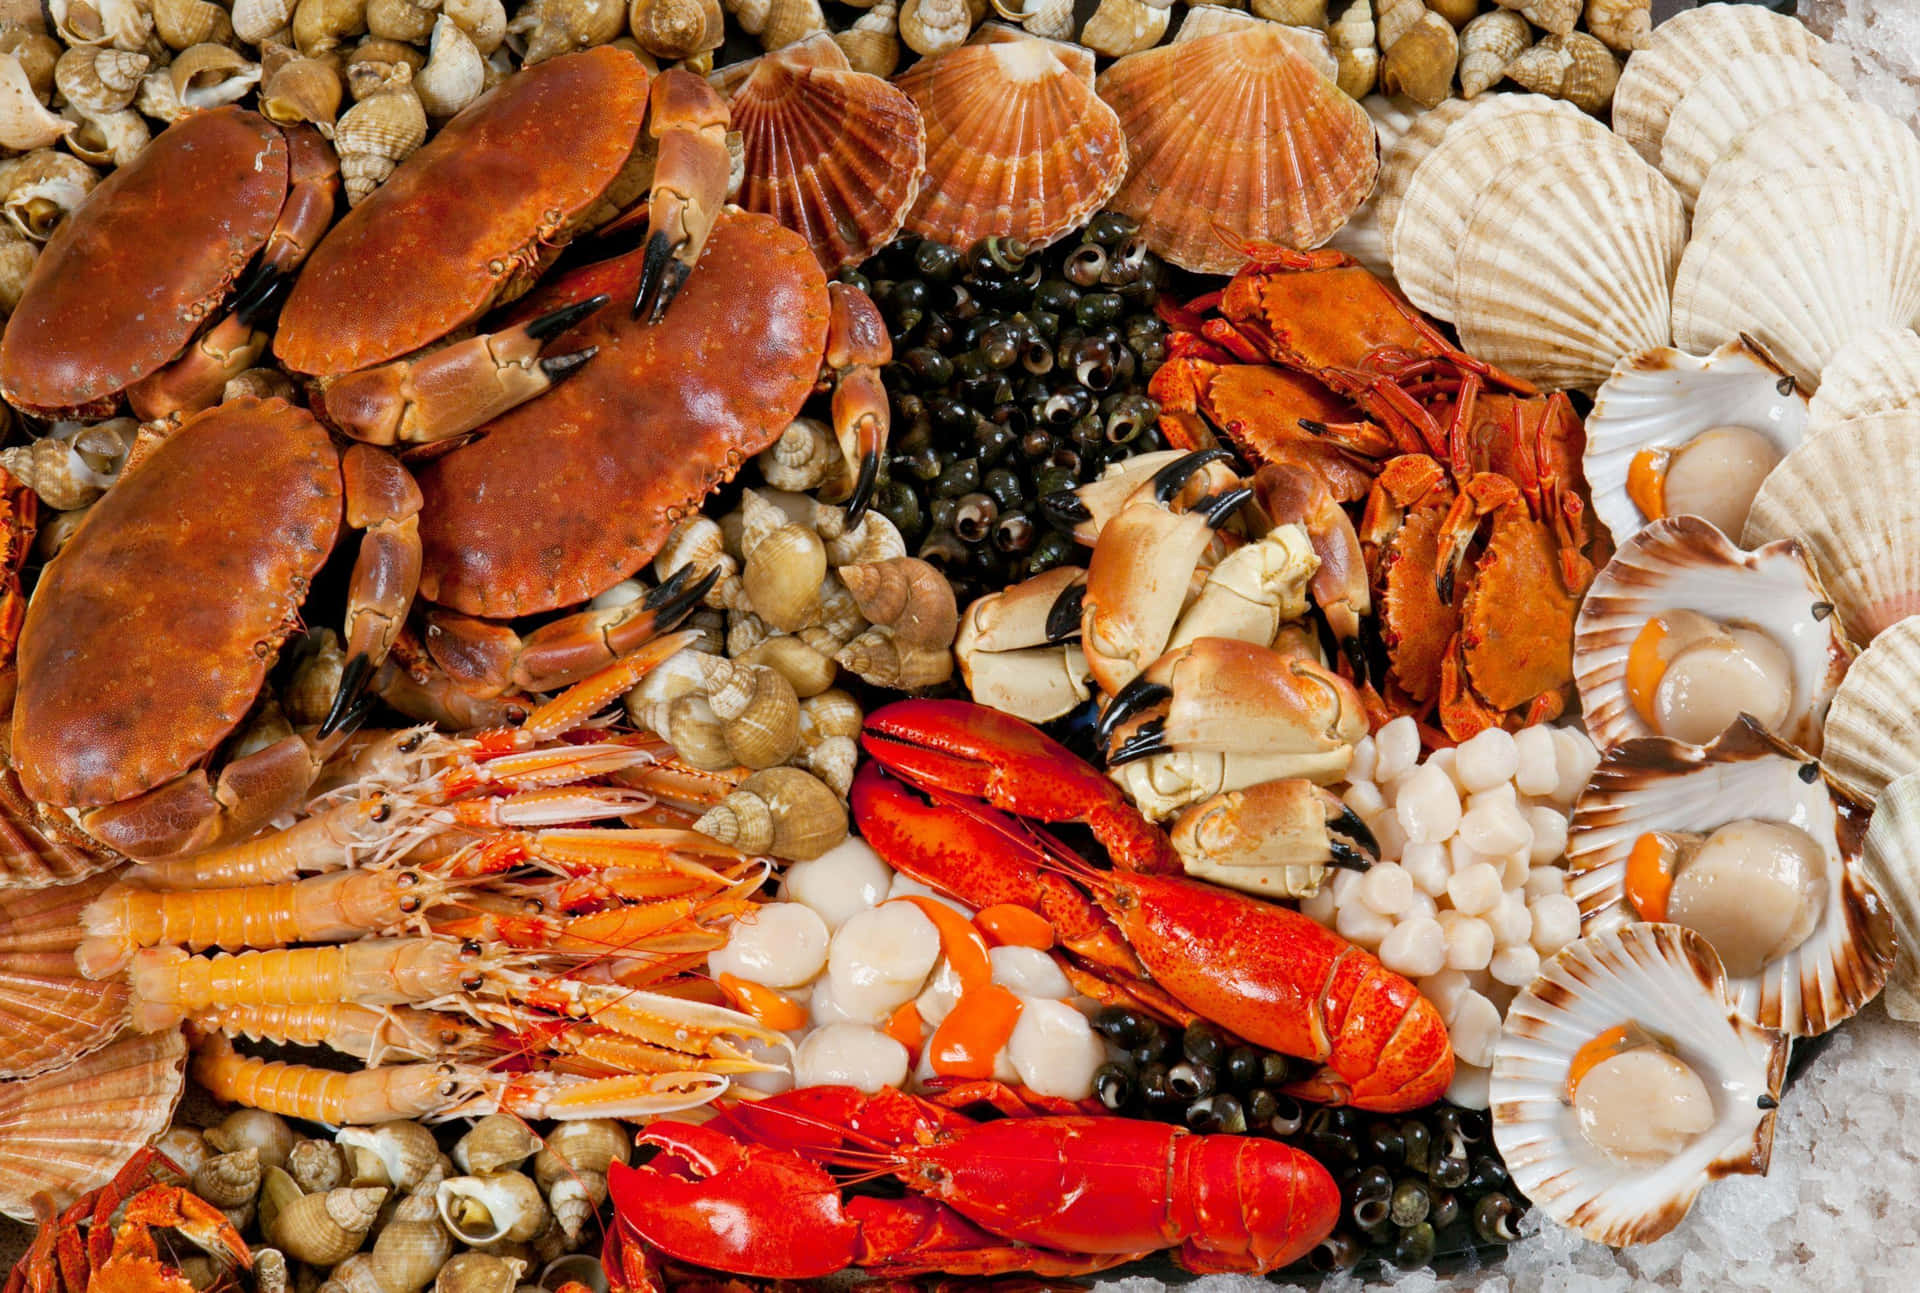 Invigorate your senses with fresh and delicious seafood!